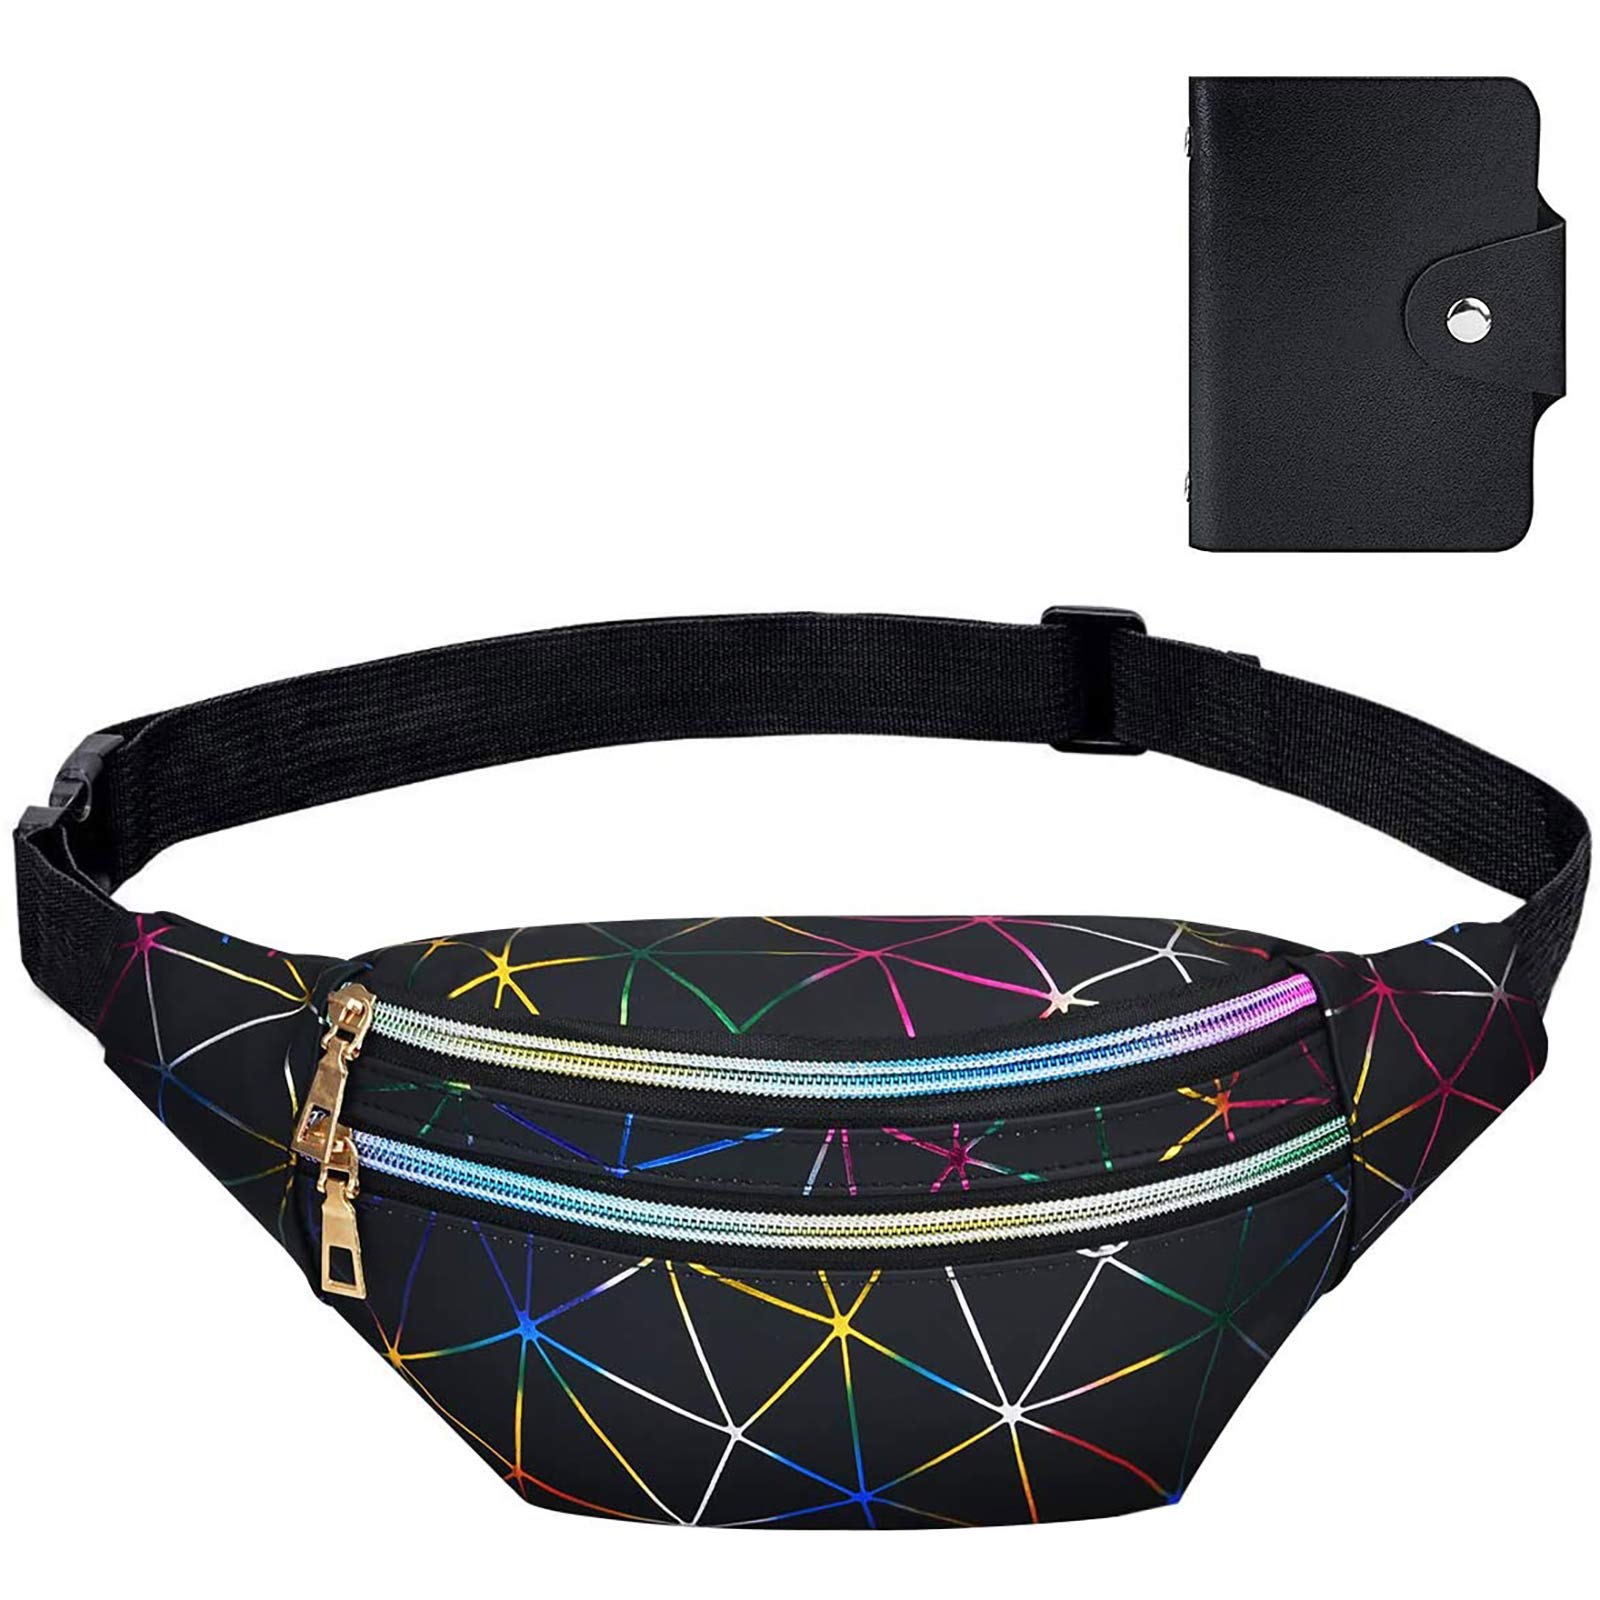 flintronic Waist Bag, Holographic Fanny Pack with PU Leather, Shiny Belt Bag Festival Rave Bumbags for Ladies Travel Party Sports Running Hiking(Black)(1 Business Card Holder Include)